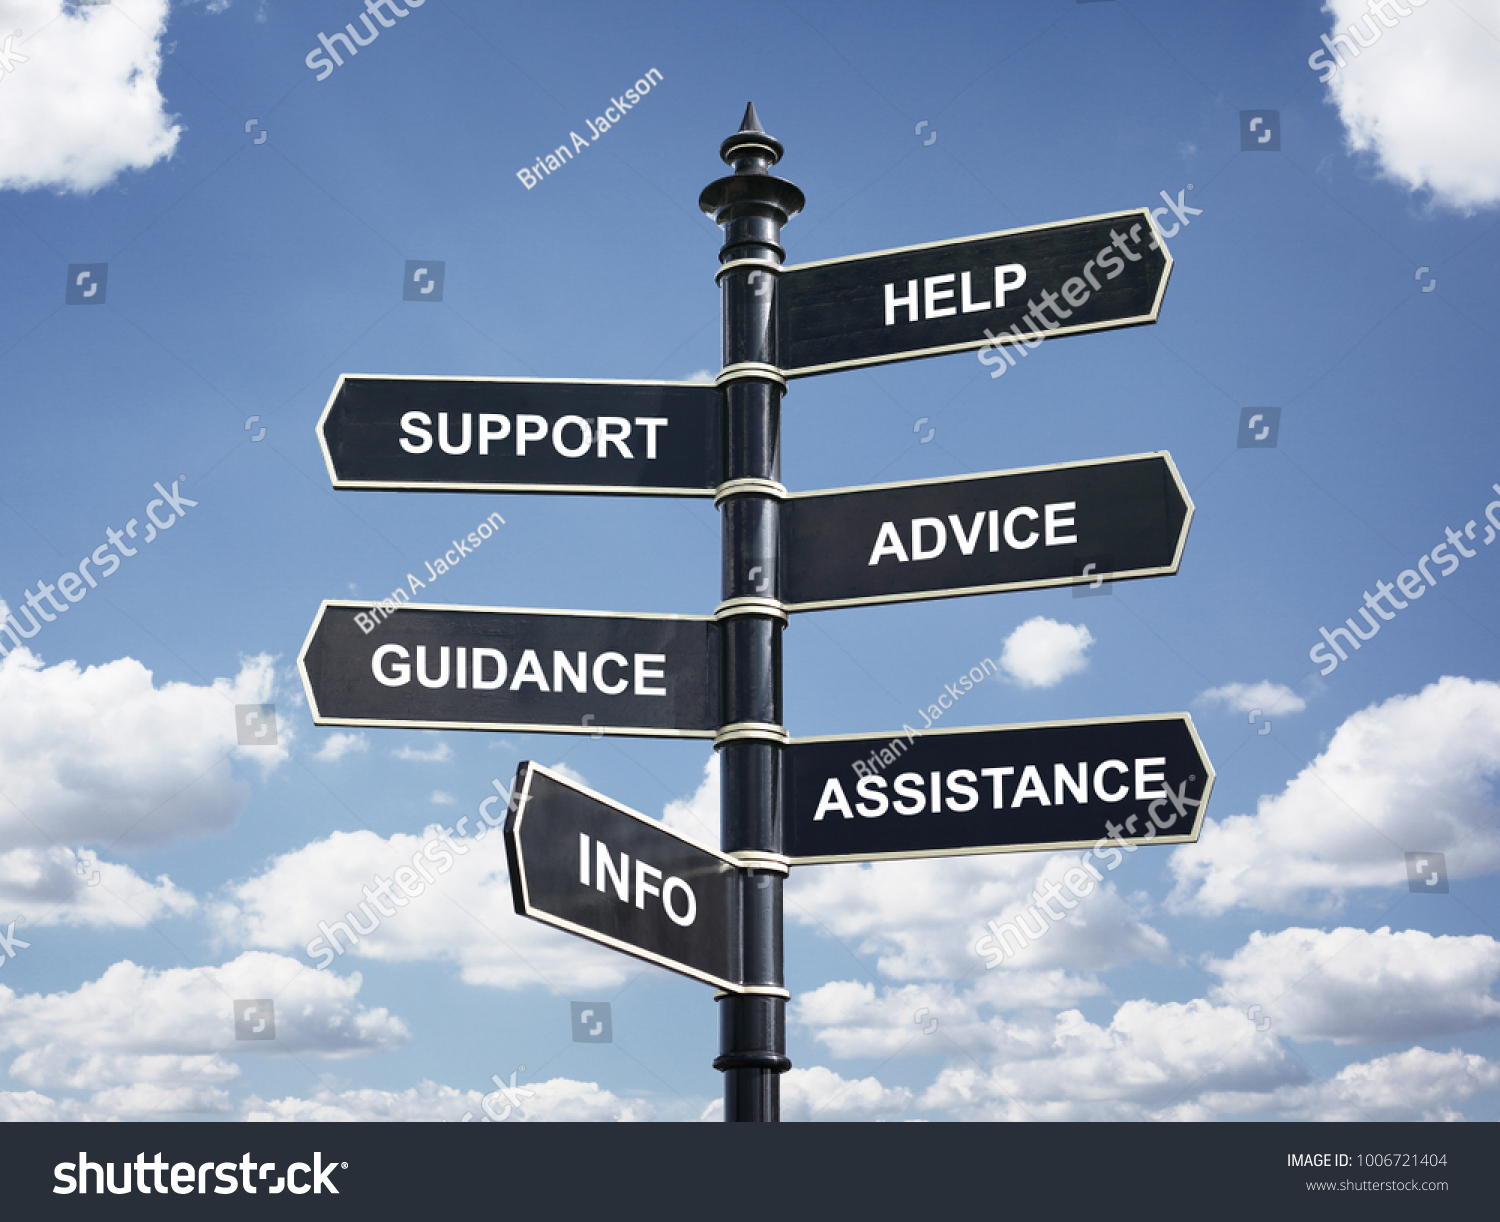 Help, support, advice, guidance, assistance and info crossroad signpost business concept #1006721404